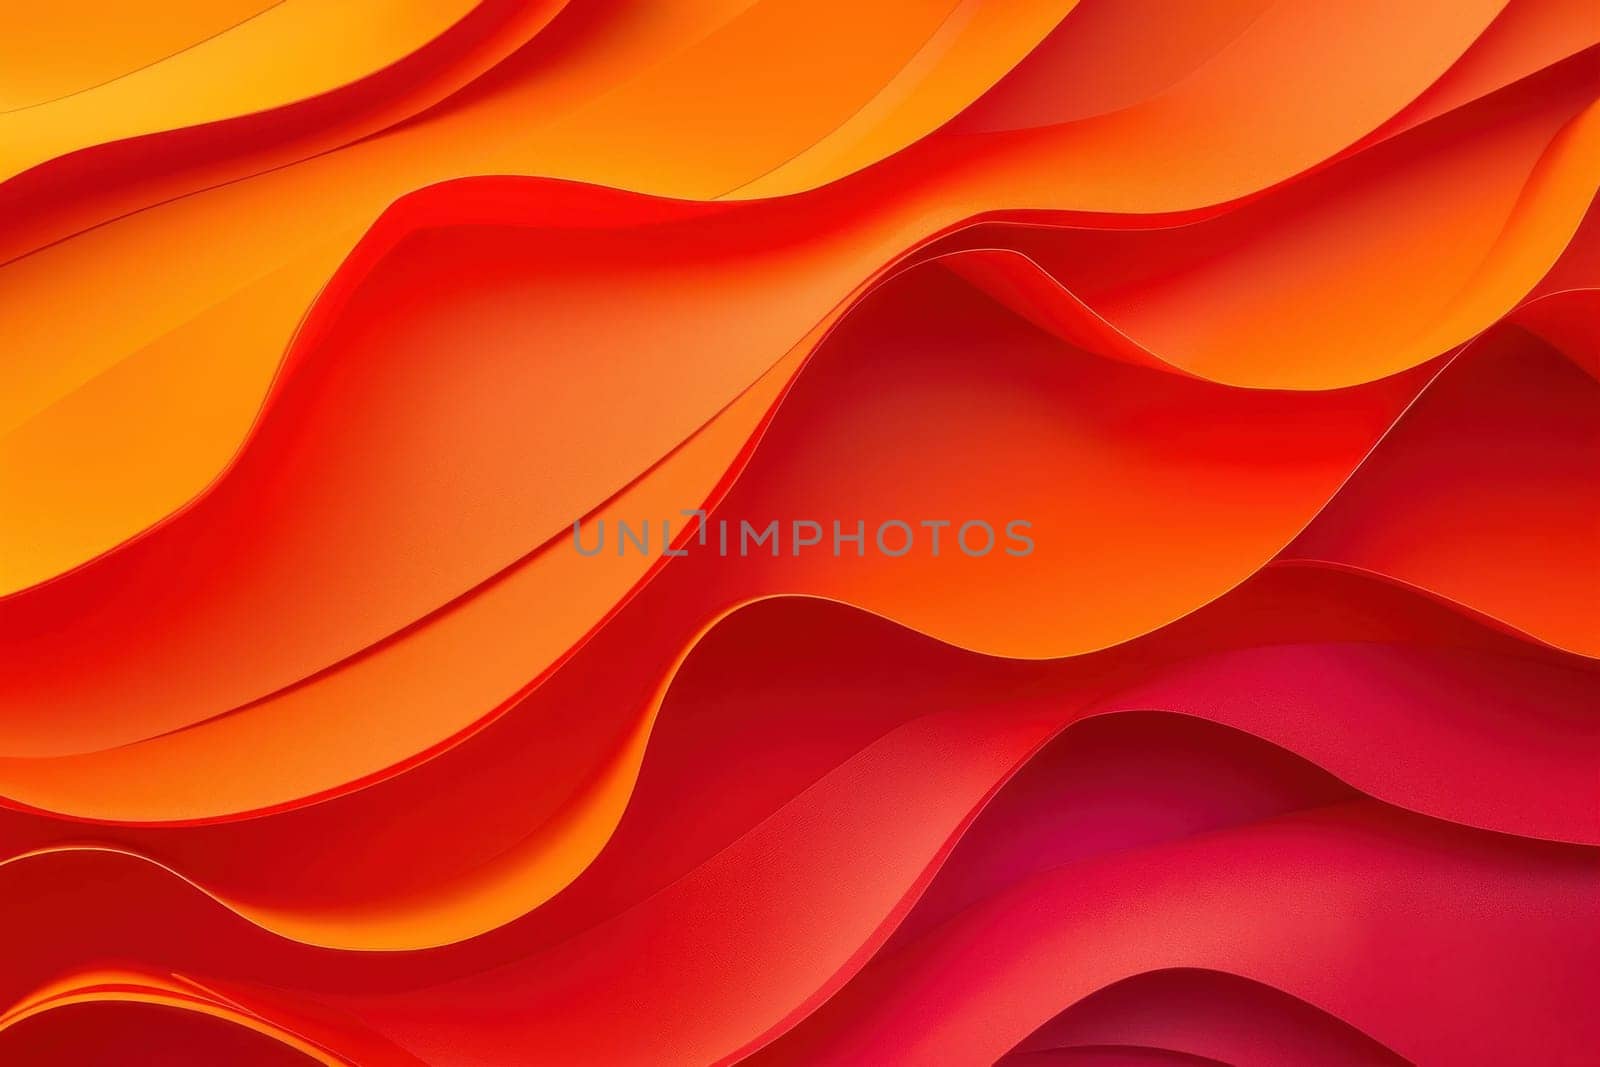 Abstract waves of red, orange, and yellow vibrant wavy shapes in travel inspired background